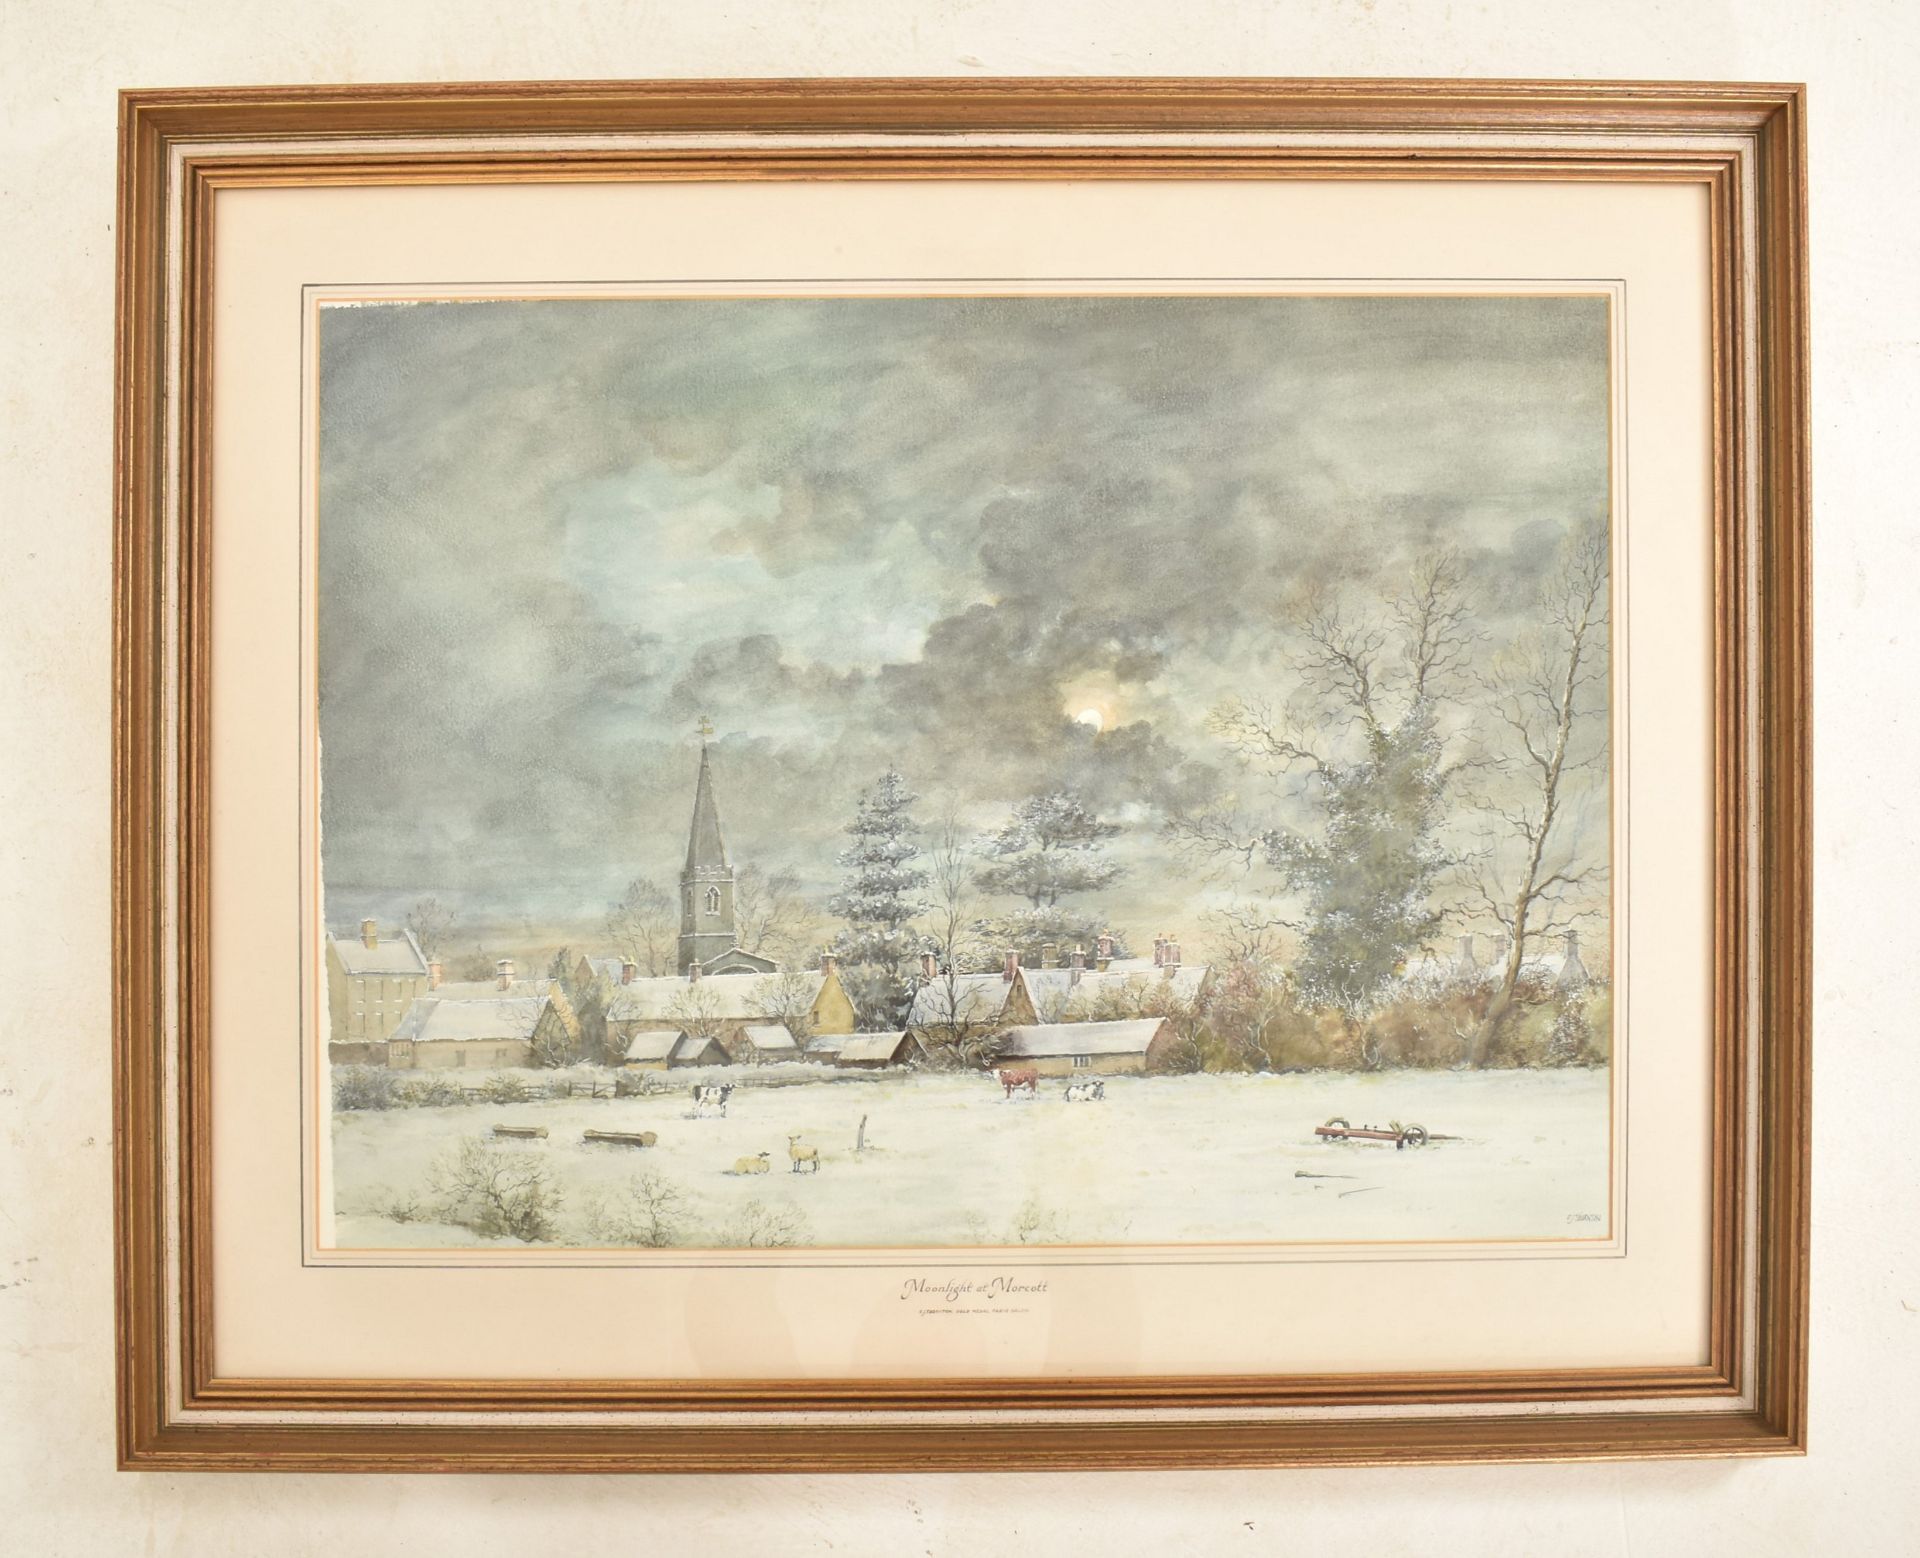 C. J. THORNTON - MOONLIGHT AT MORCOTTE - Image 2 of 5